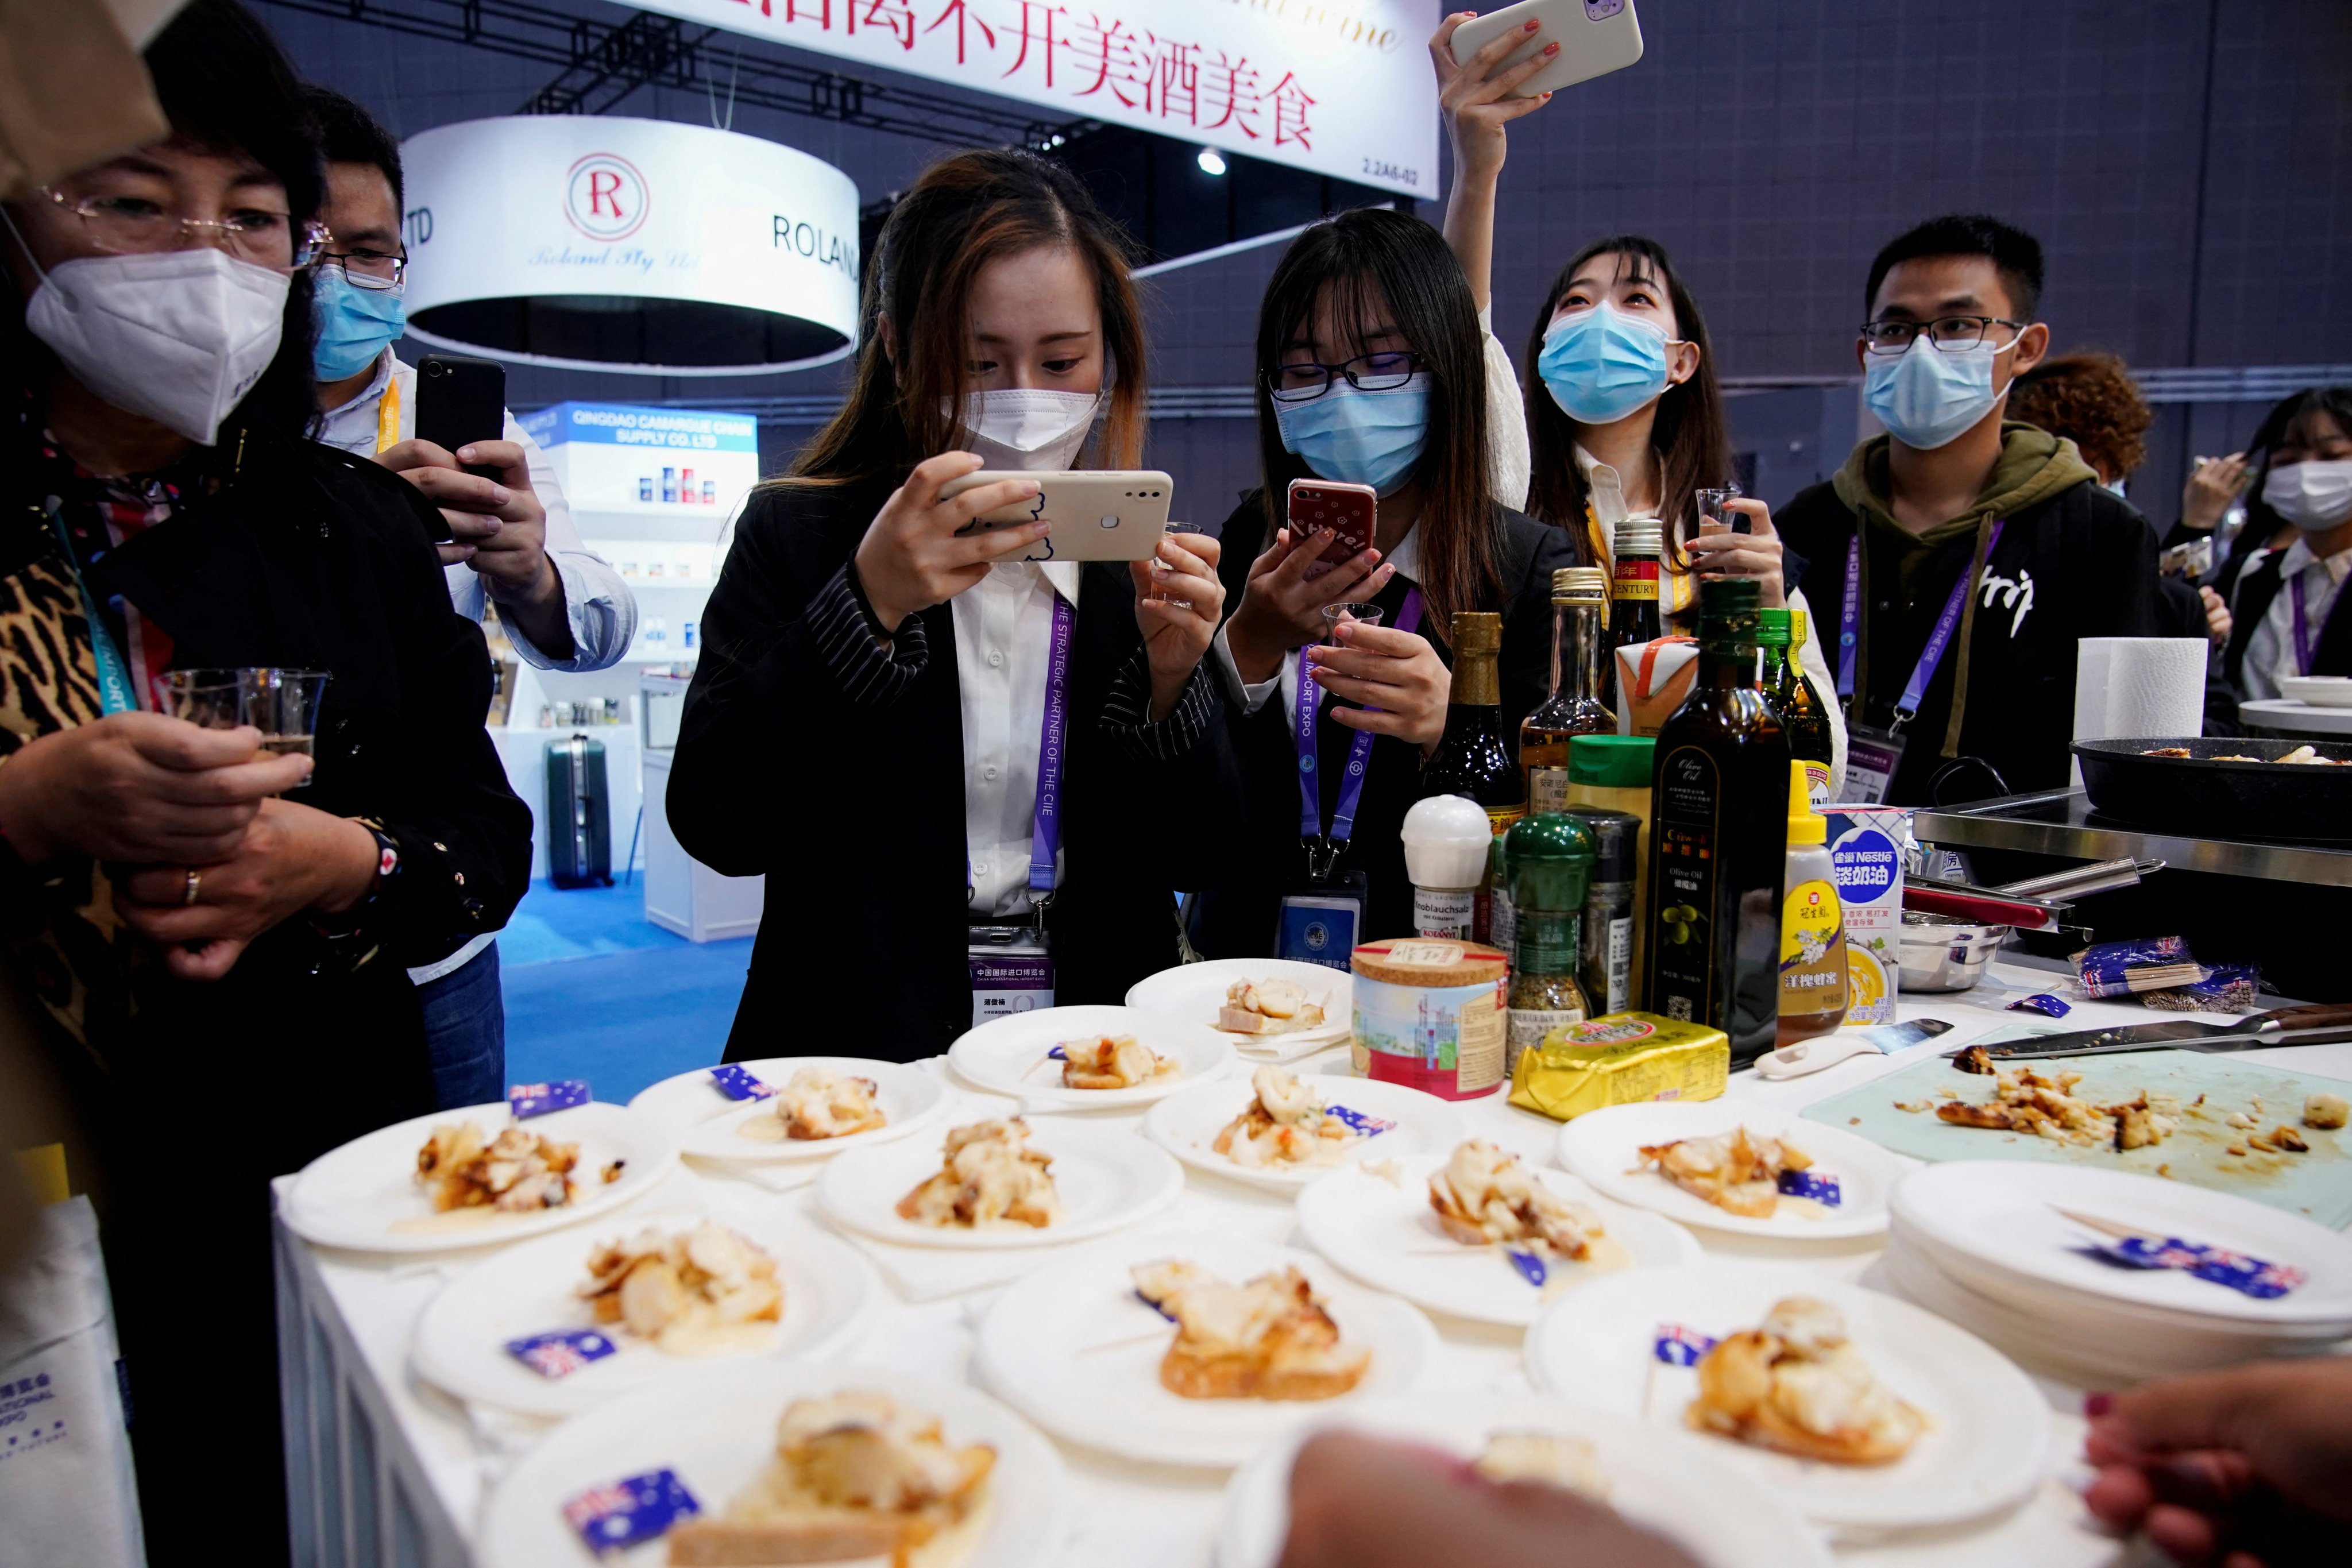 People take pictures of Australian lobster at an Australia food booth during the third China International Import Expo in Shanghai on November 6, 2020. The return of face-to-face diplomatic visits and Australian coal reaching Chinese ports has raised hopes of a continued thaw in ties between Australia and China. Photo: Reuters